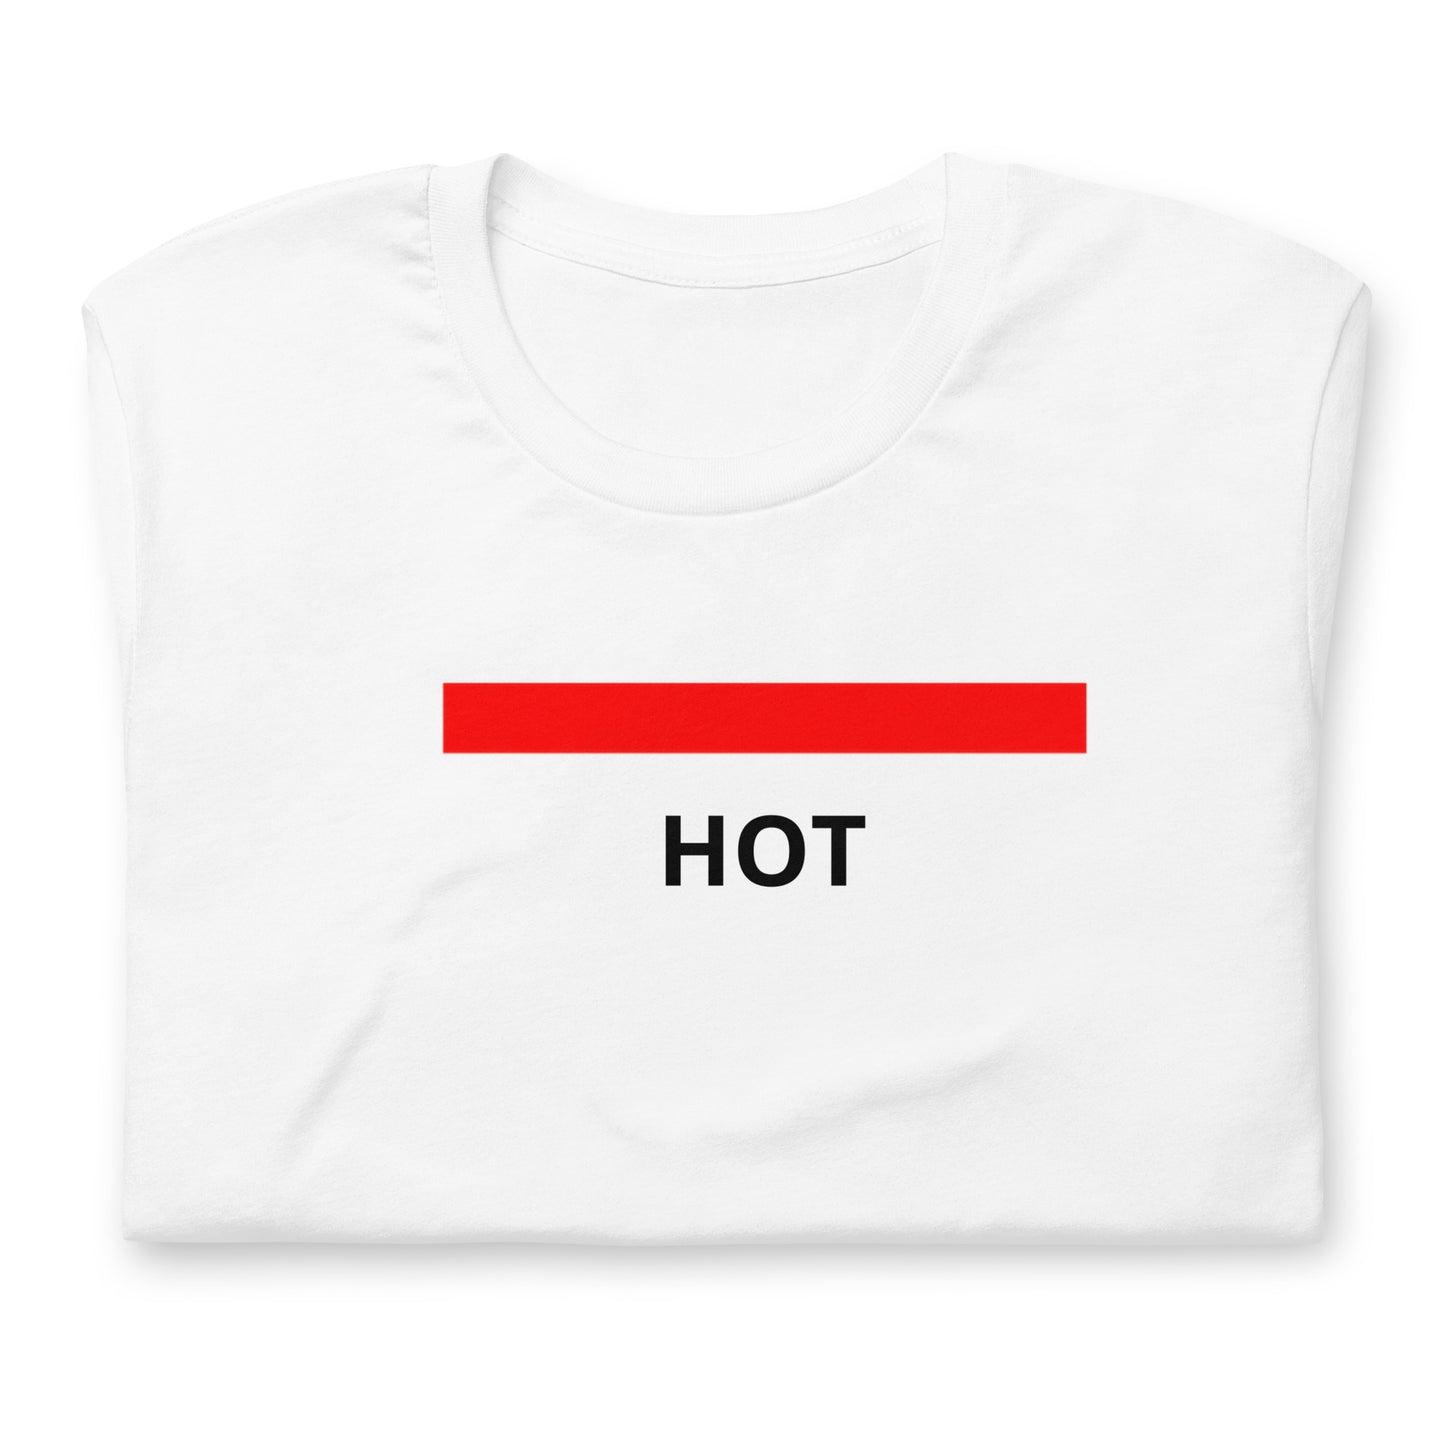 Unisex white tee shirt with a bar of red and says "Hot" underneath it